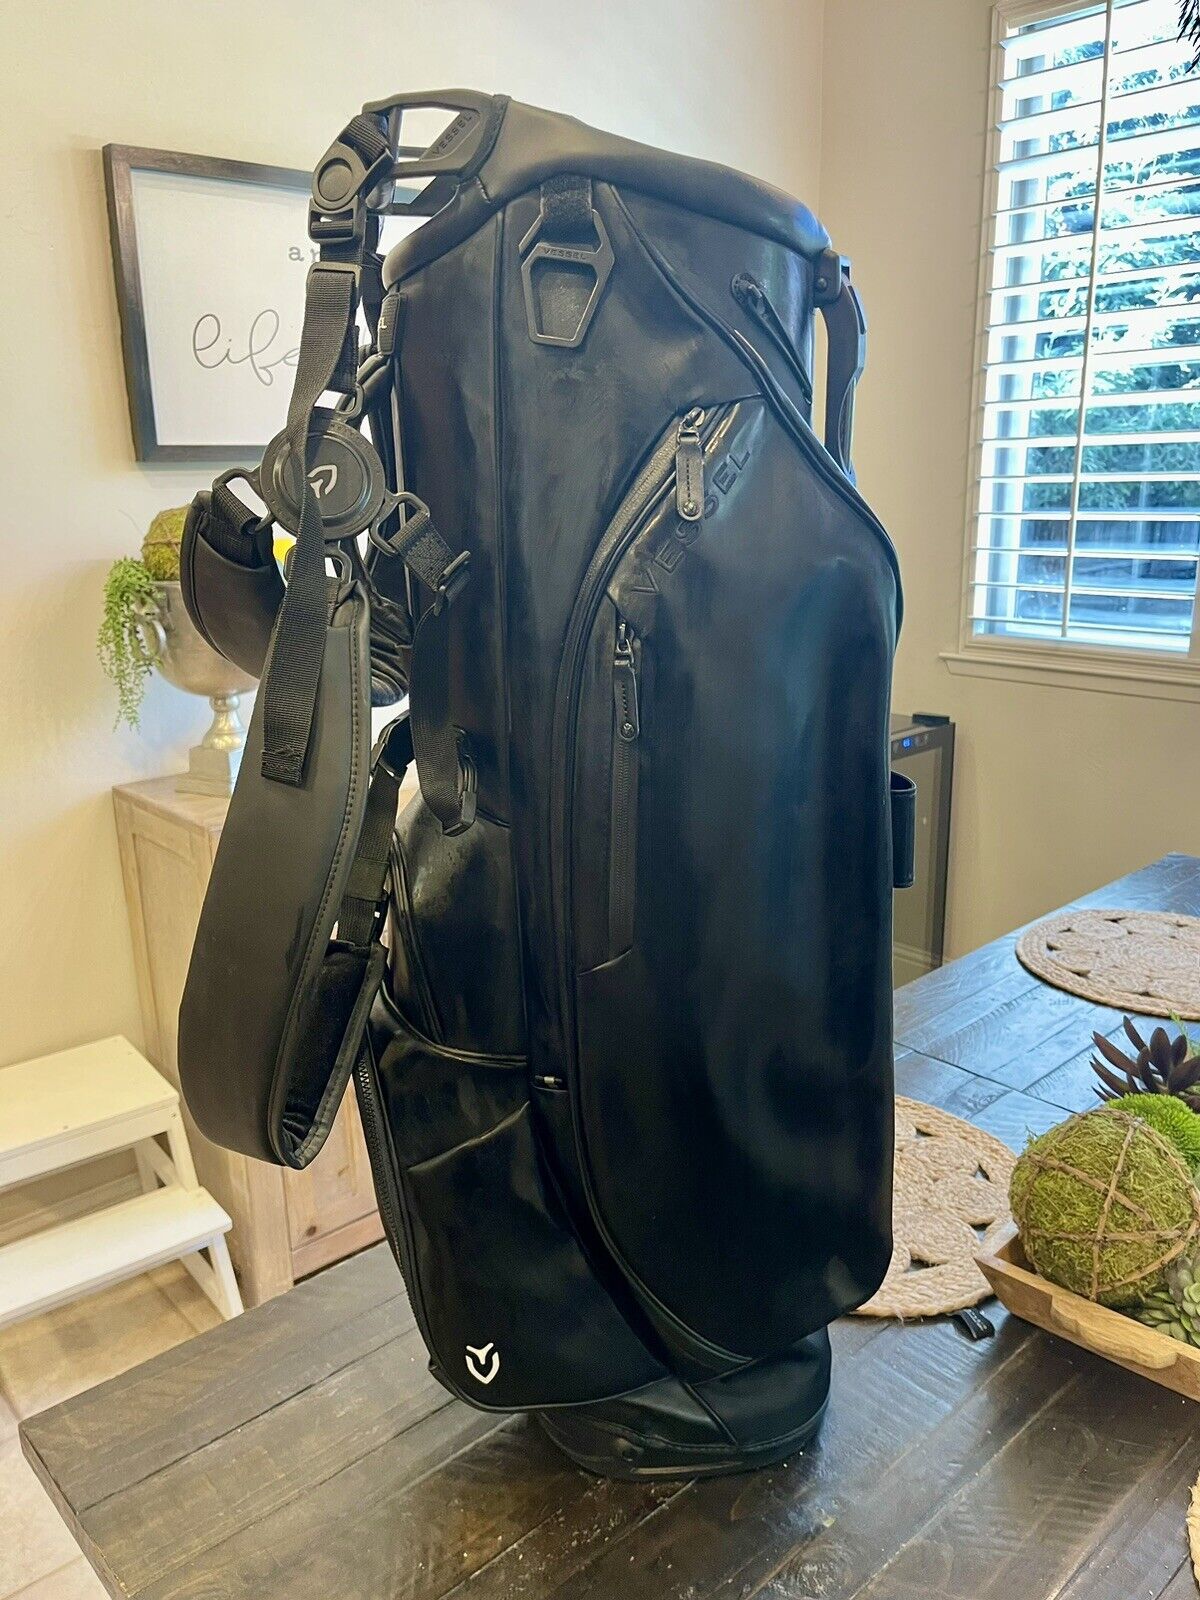 Vessel Golf Player IV Stand / Carry Bag 6-Way Top - Handcrafted Golf Bag